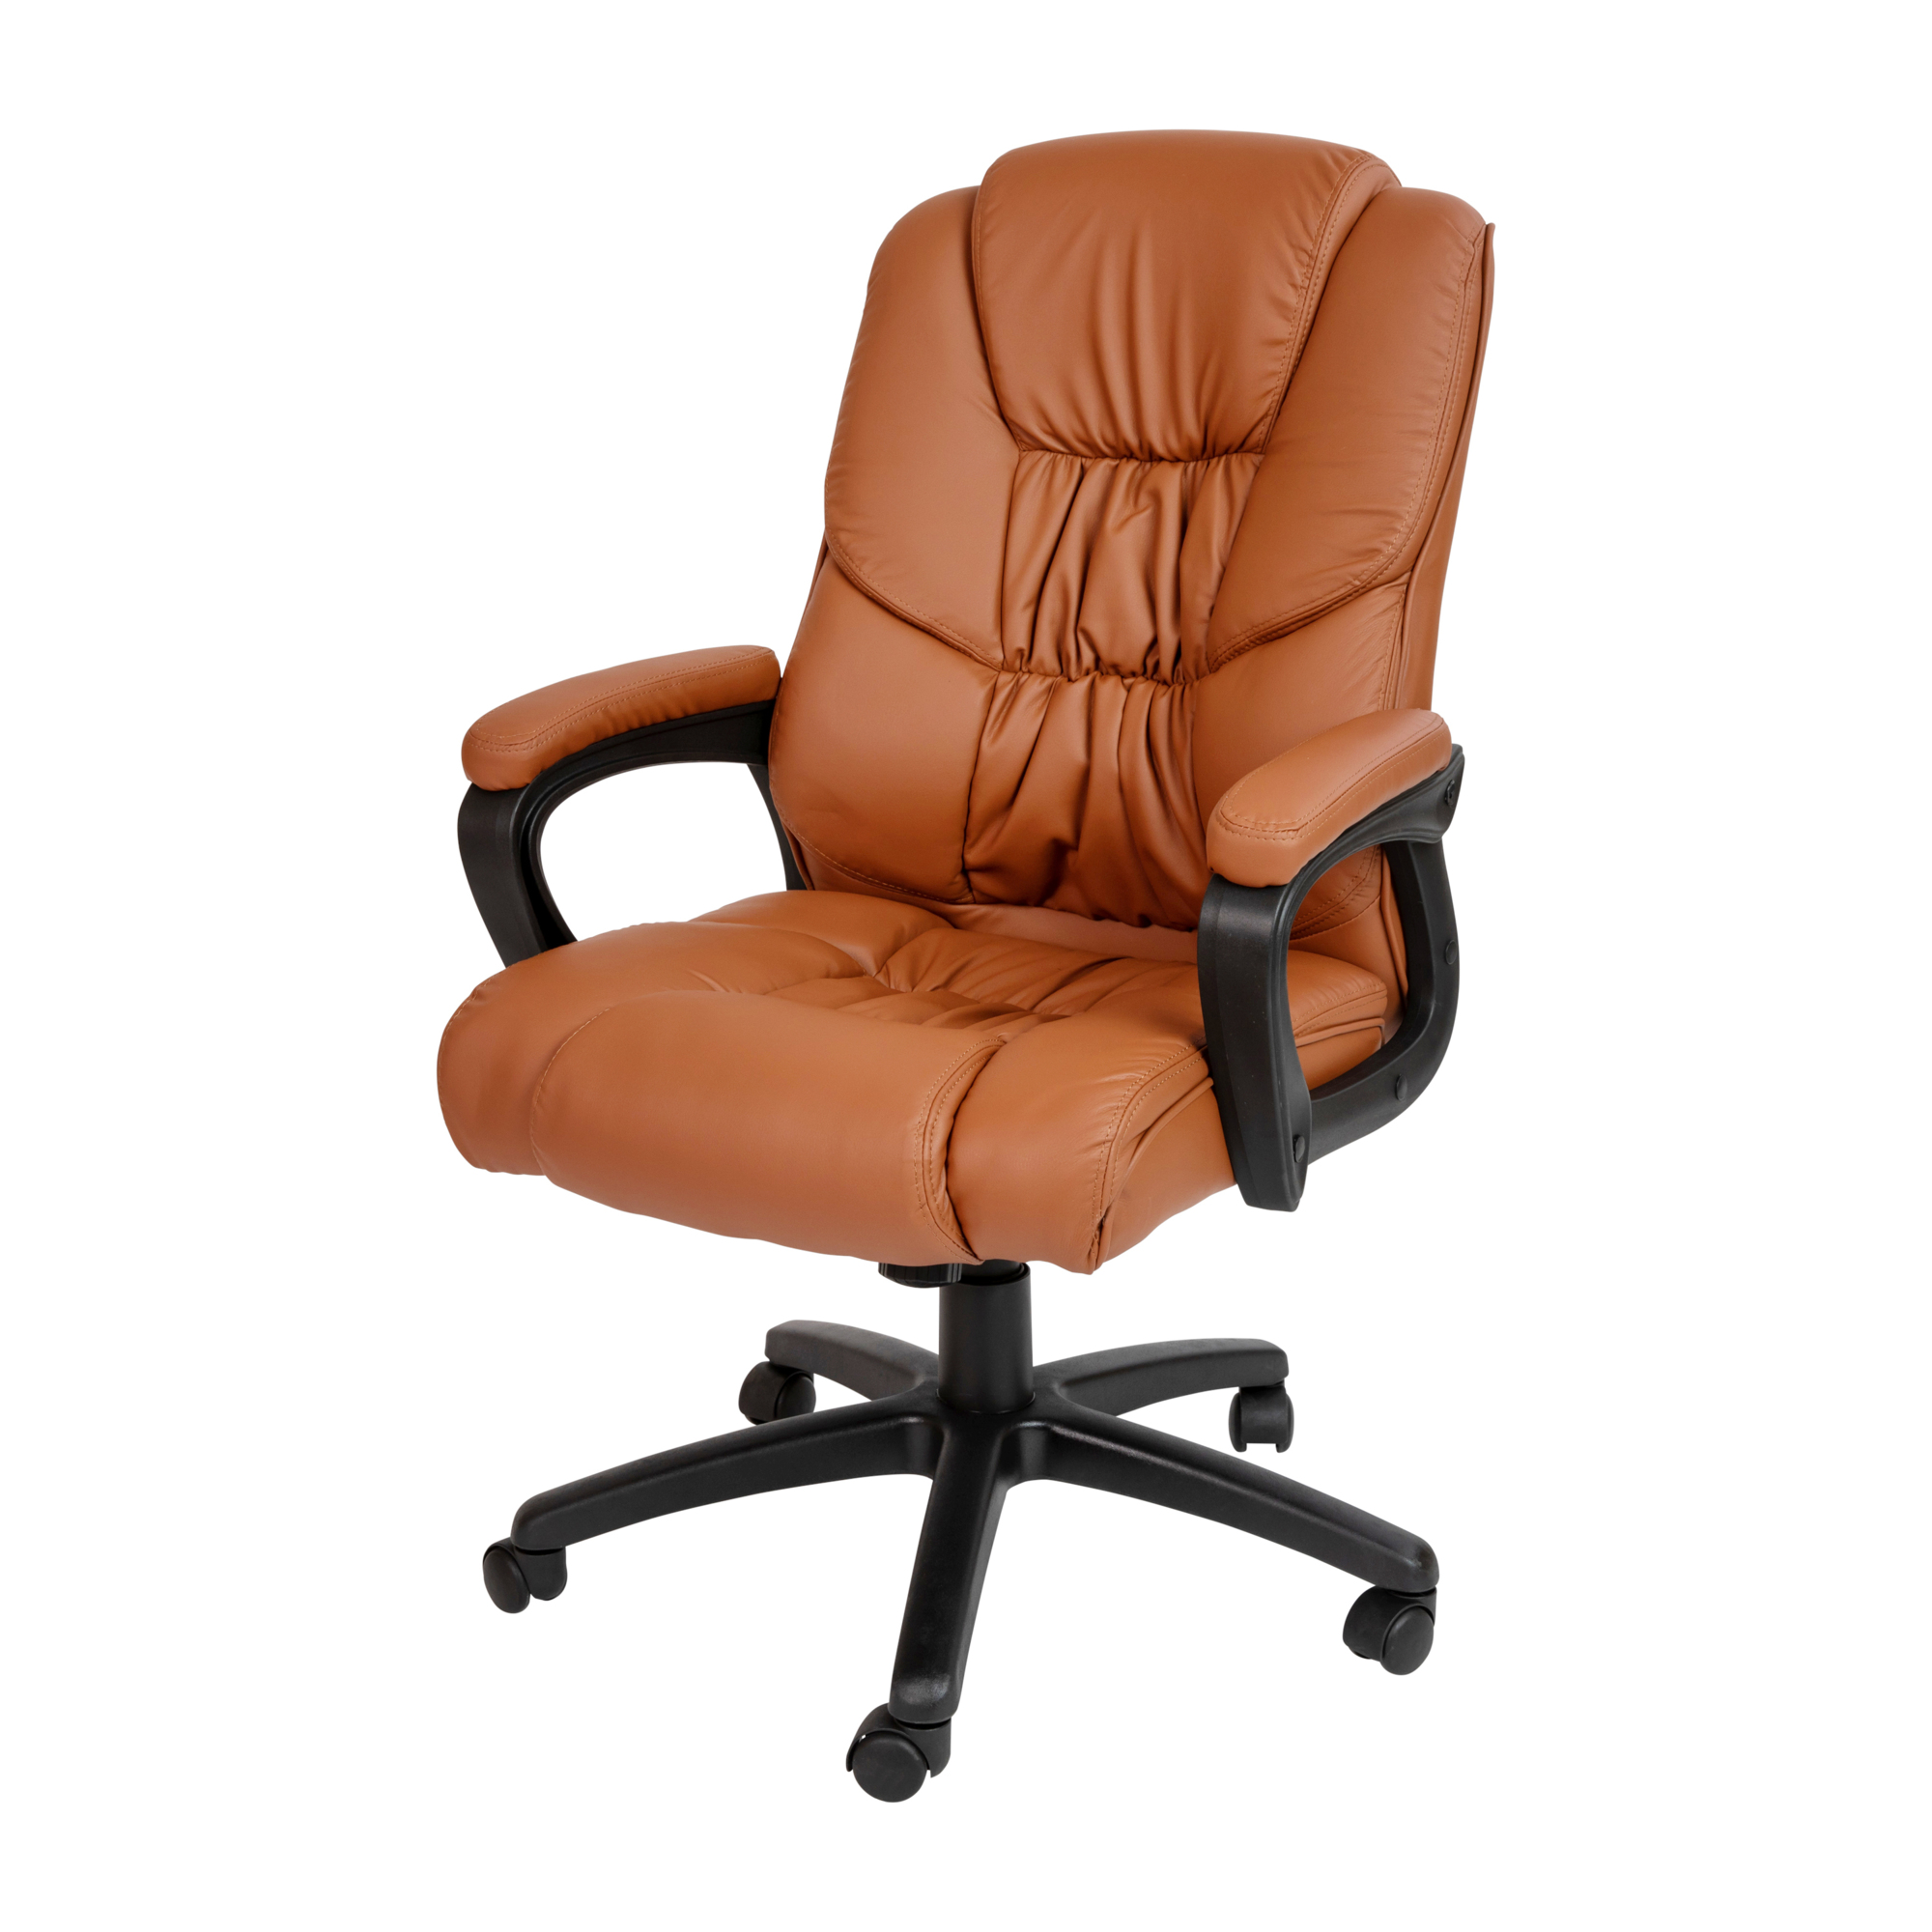 Flash Furniture, 400 lb. Big Tall Brown LeatherSoft Office Chair, Primary Color Brown, Included (qty.) 1, Model CX1179HBR